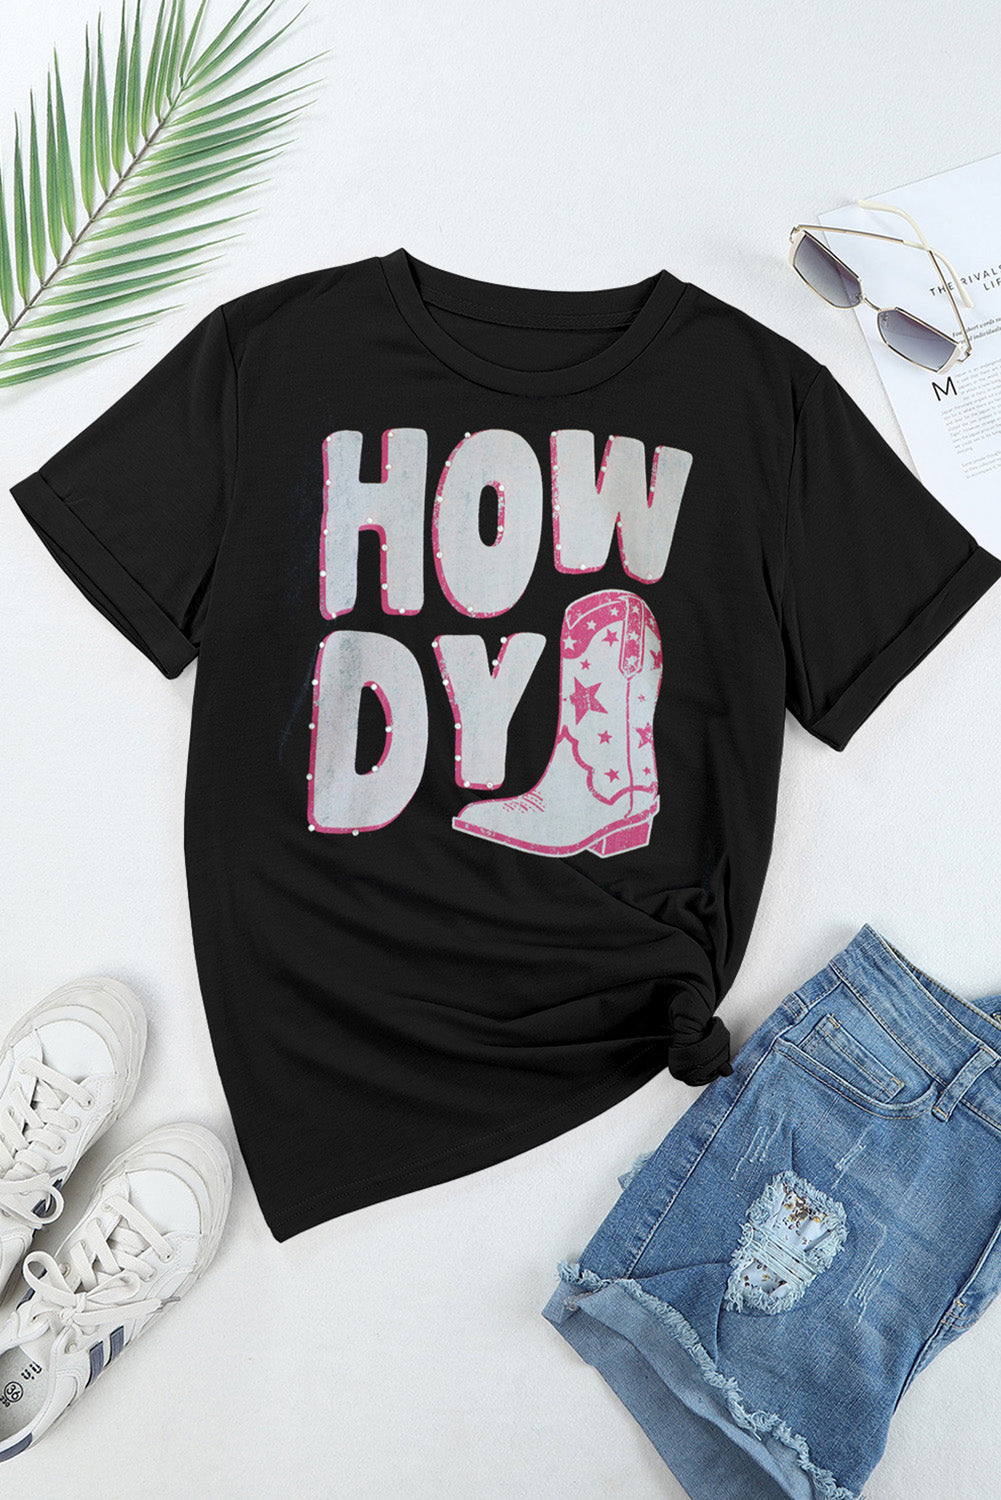 Our Round Neck Short Sleeve T-Shirt - Say HOWDY